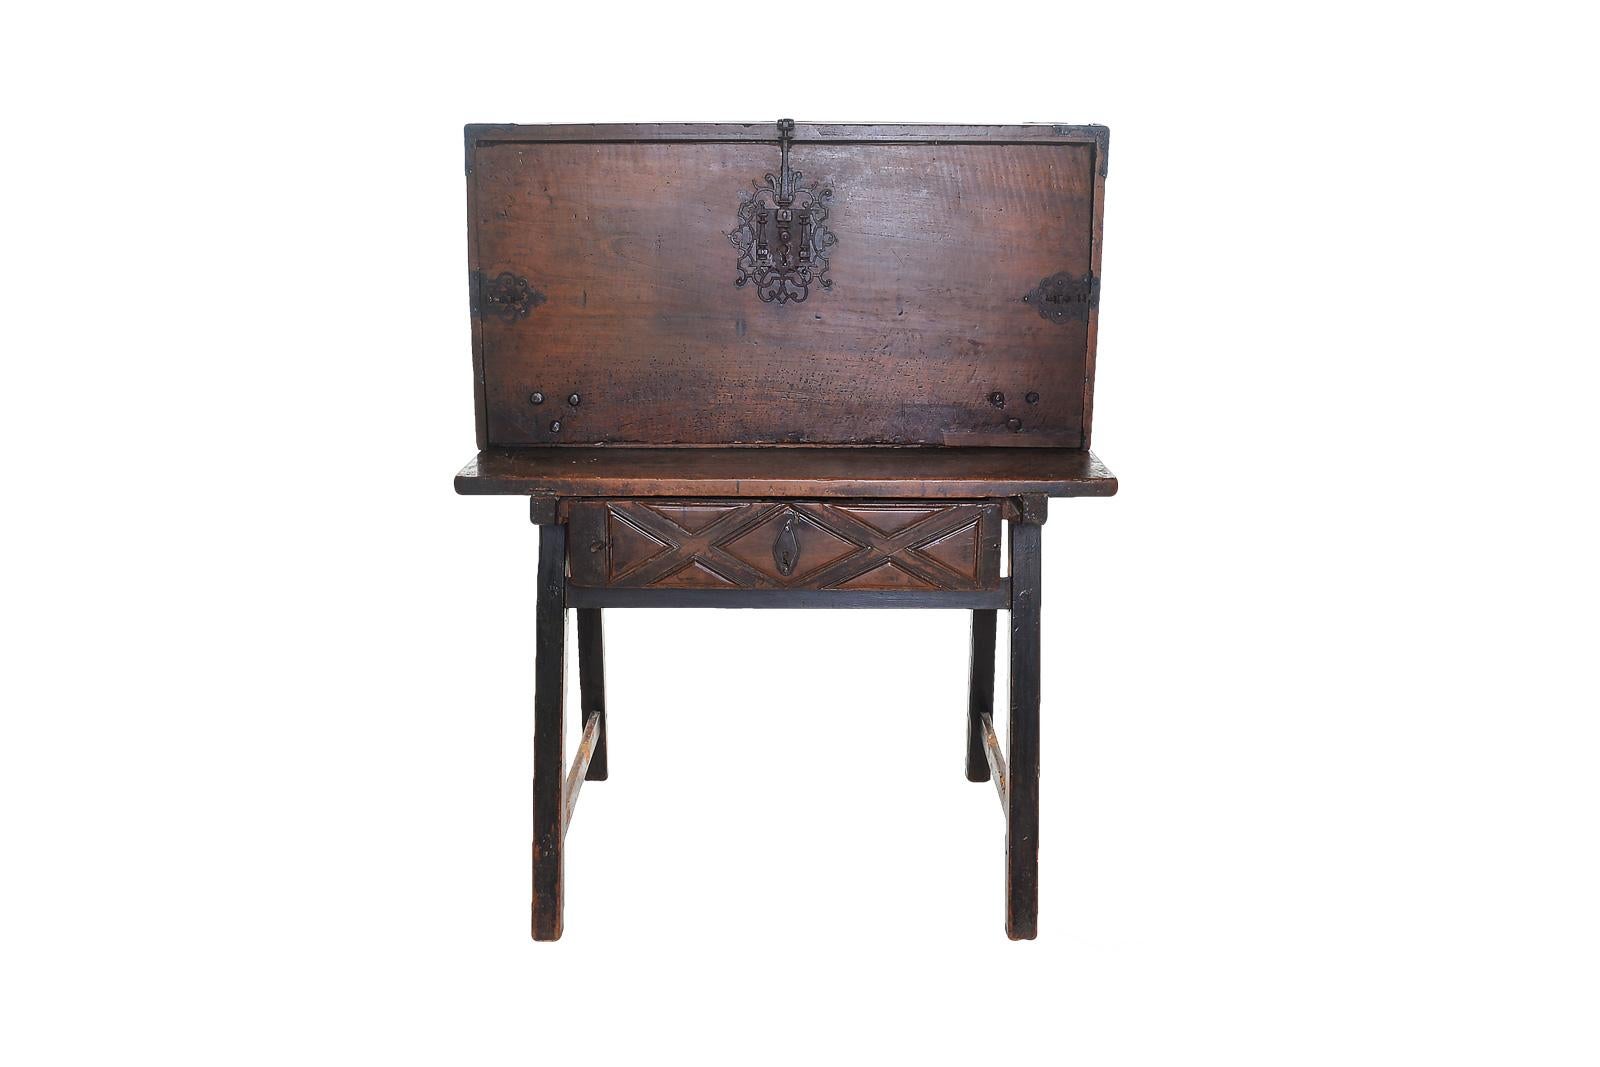 A bargueno is a spanish piece, it was like a traveling desk, opening with a flap revealing multiple drawers and doors.
Resting on a table opening with a drawer in the belt decorated wit diamond point. From the 18th century in molded walnut.
The